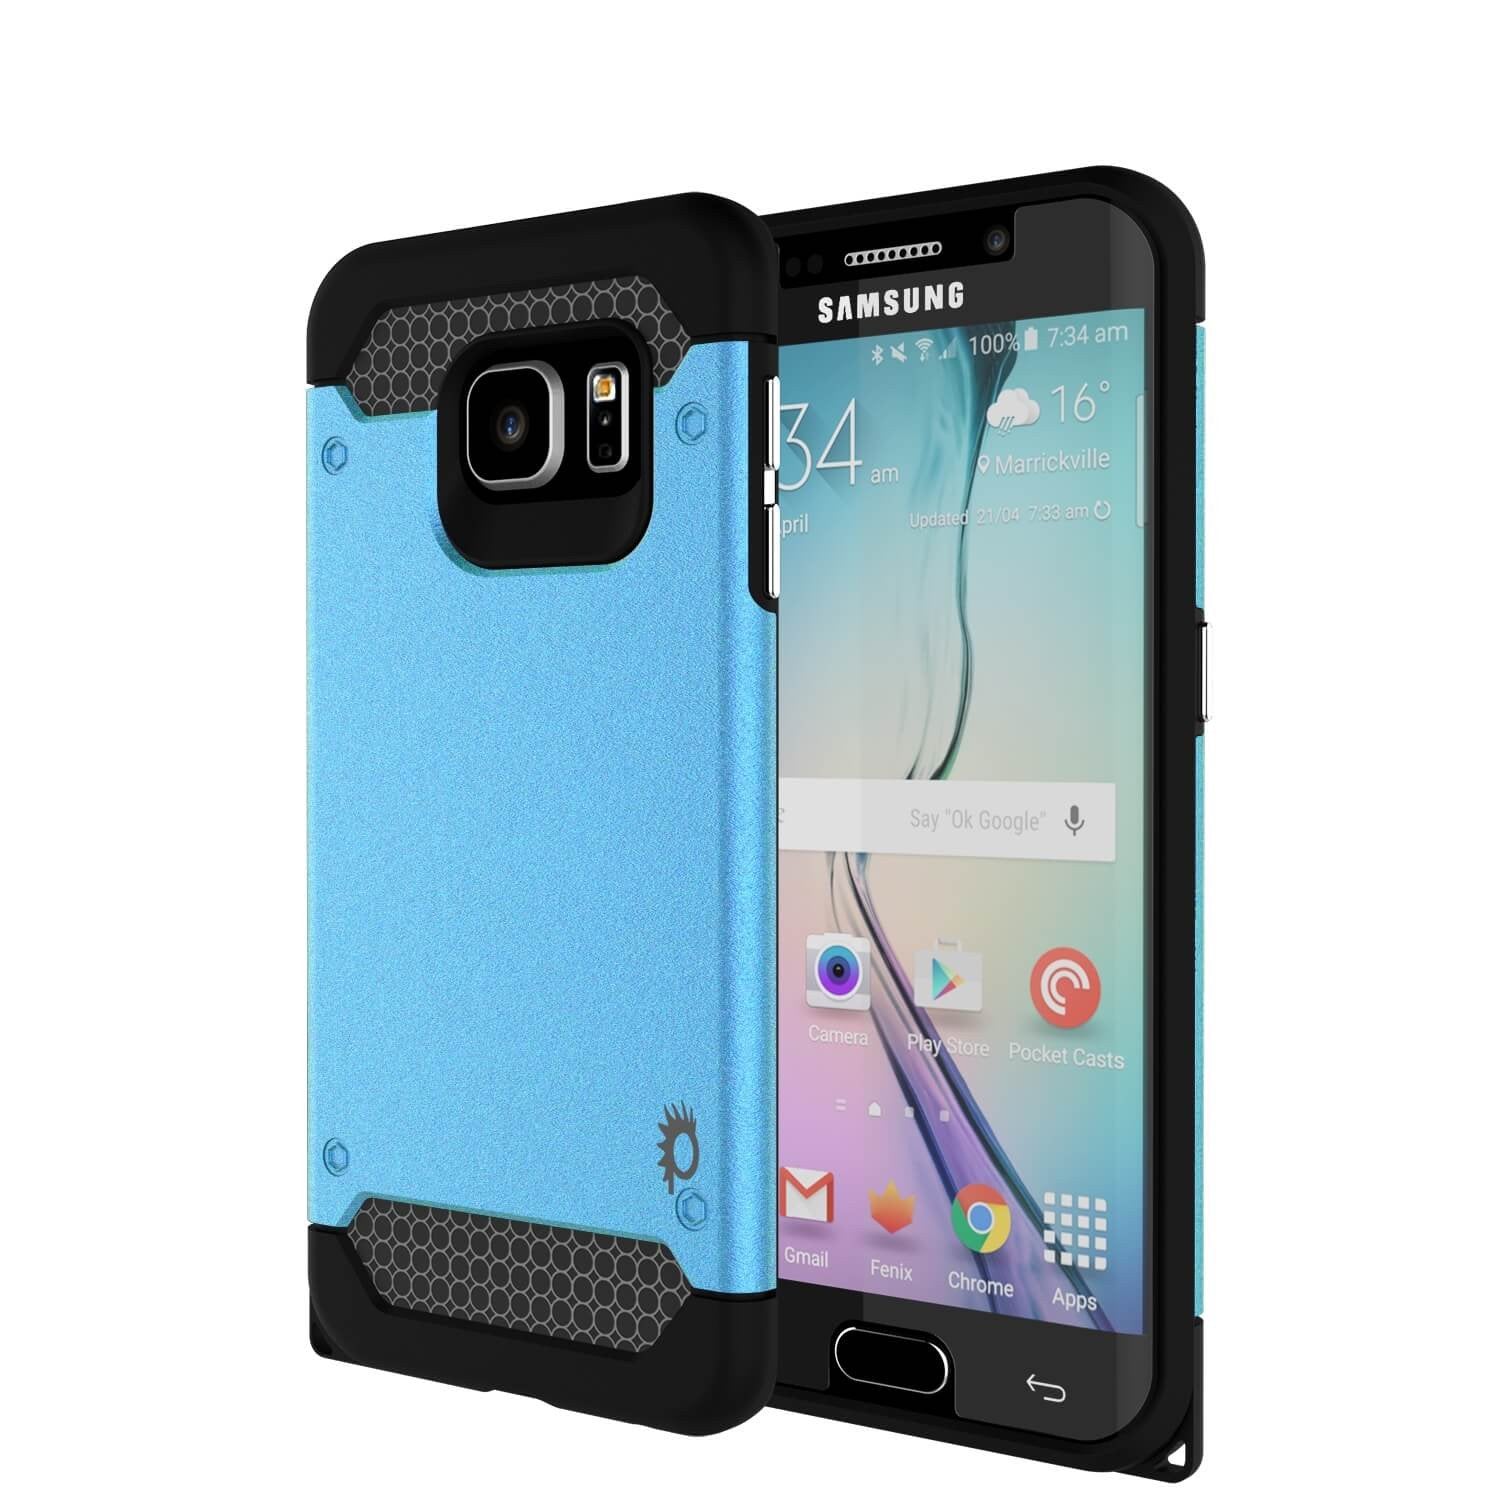 Galaxy s6 EDGE Plus Case PunkCase Galactic Teal Series Slim Armor Soft Cover w/ Screen Protector